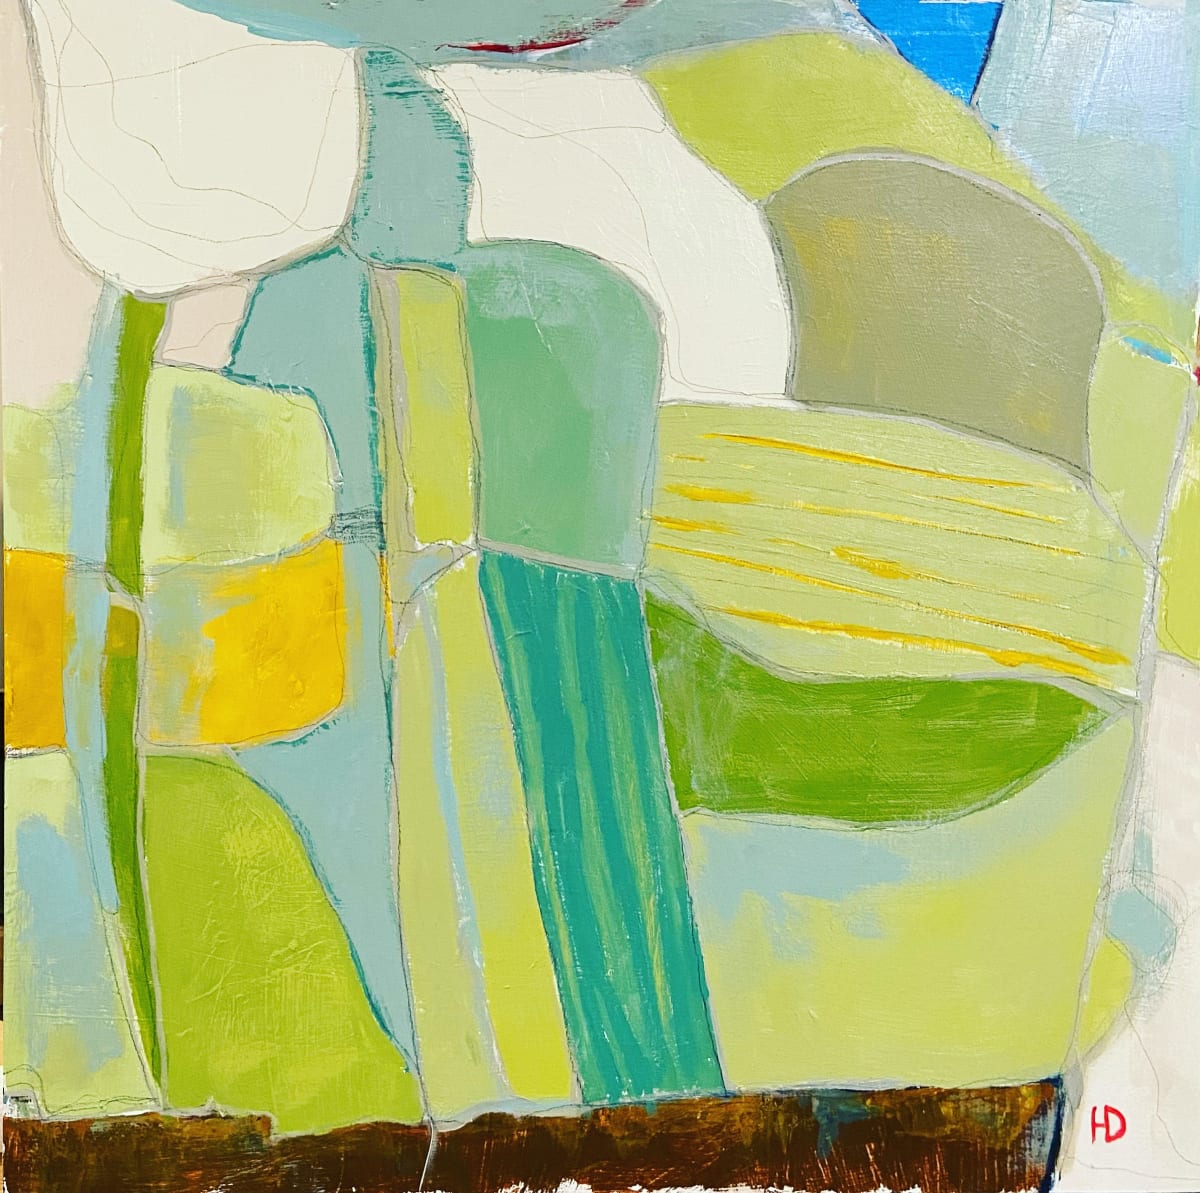 We Traveled East, Then South, Then East Again/Kansas Fields in Summer by Heather Duris  Image: Abstract landscape acrylic painting on wood panel